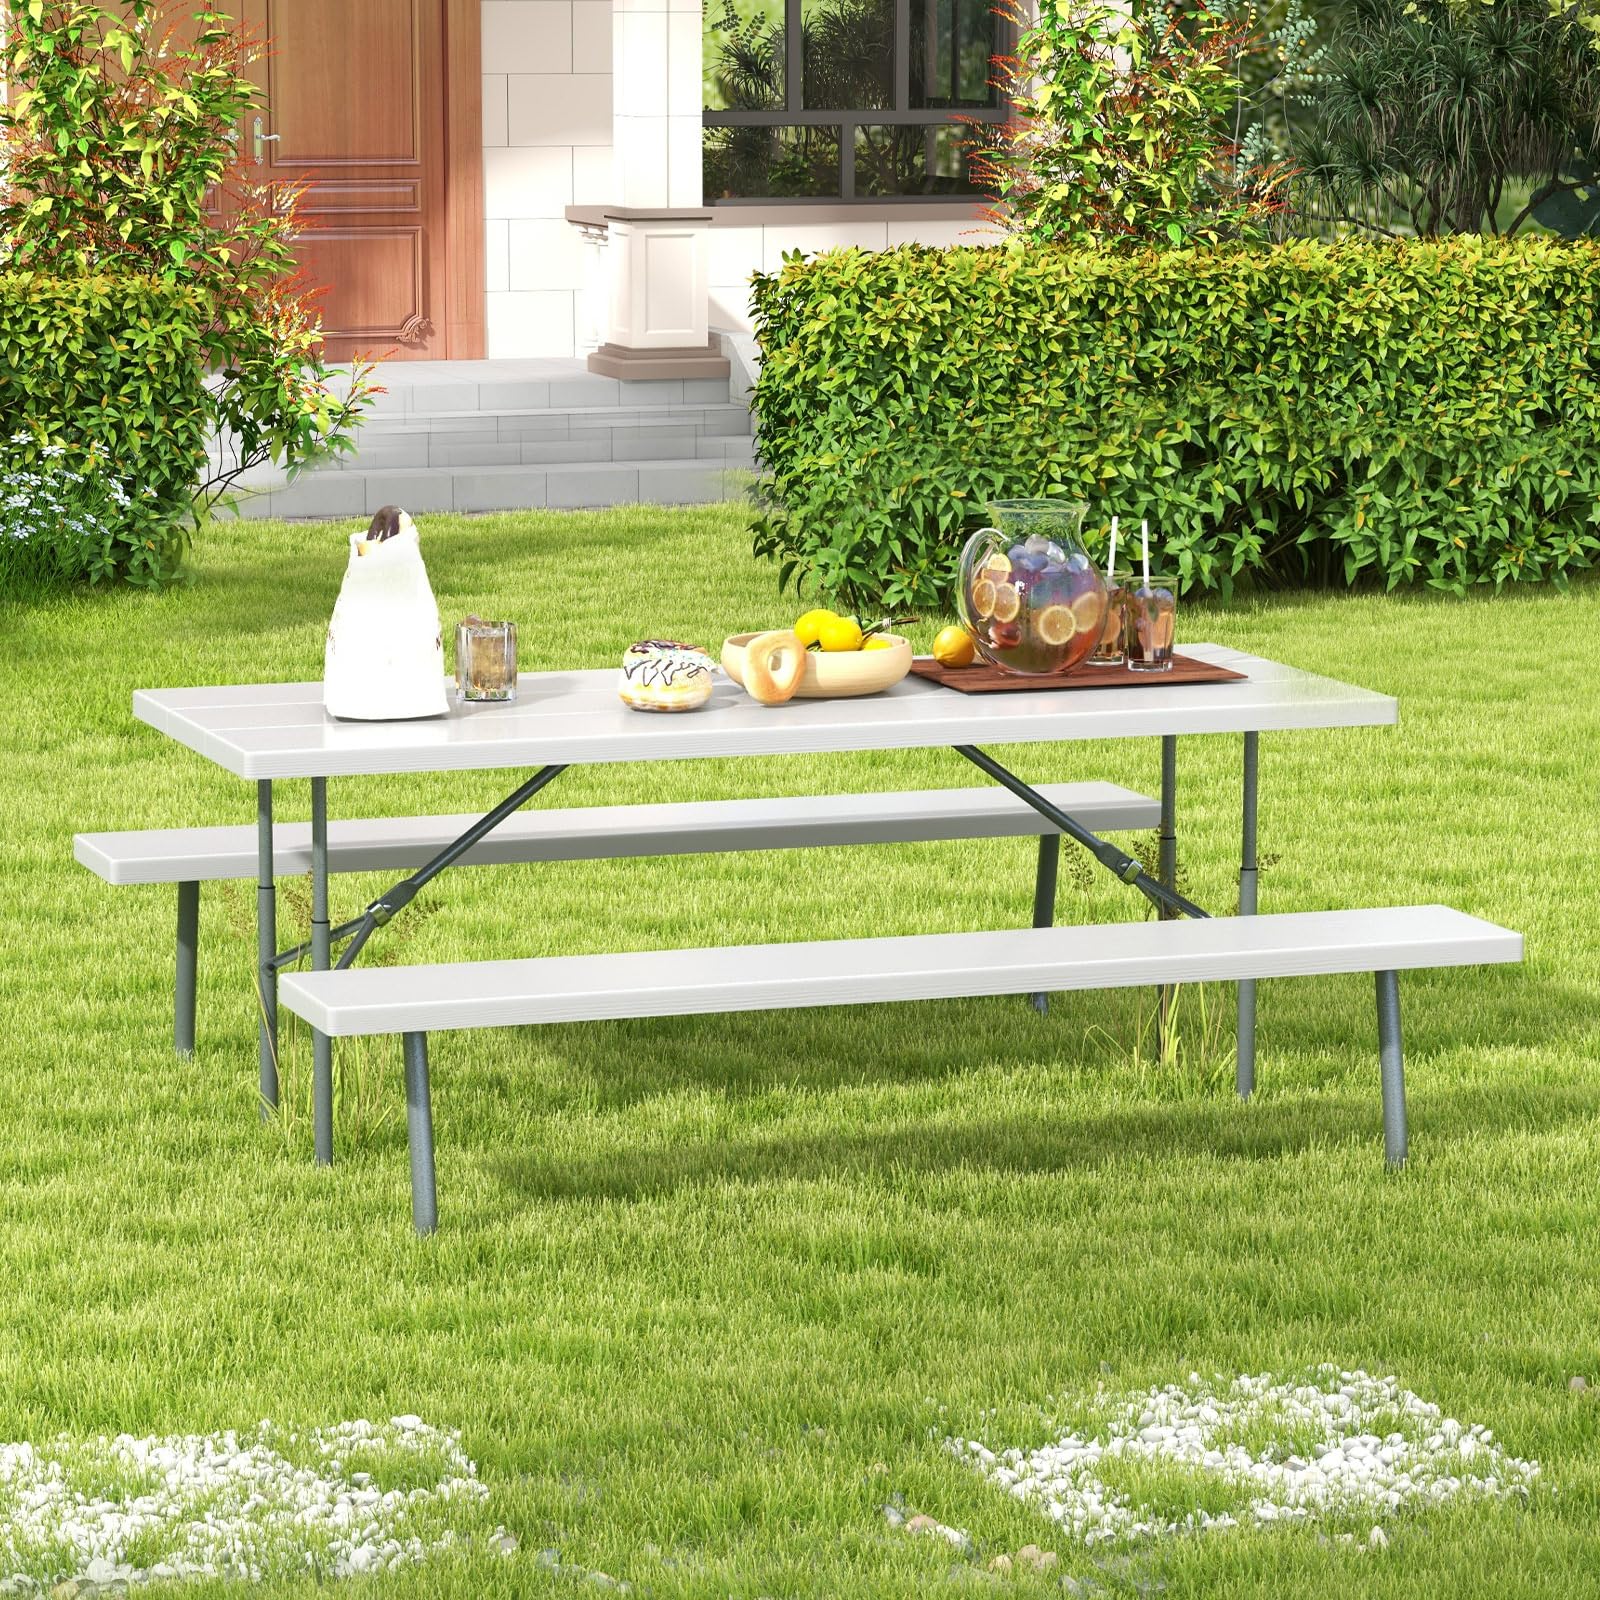 Giantex Folding Picnic Table - 6 FT Outdoor Table Bench Set for 8 Persons w/All-Weather HDPE Tabletop